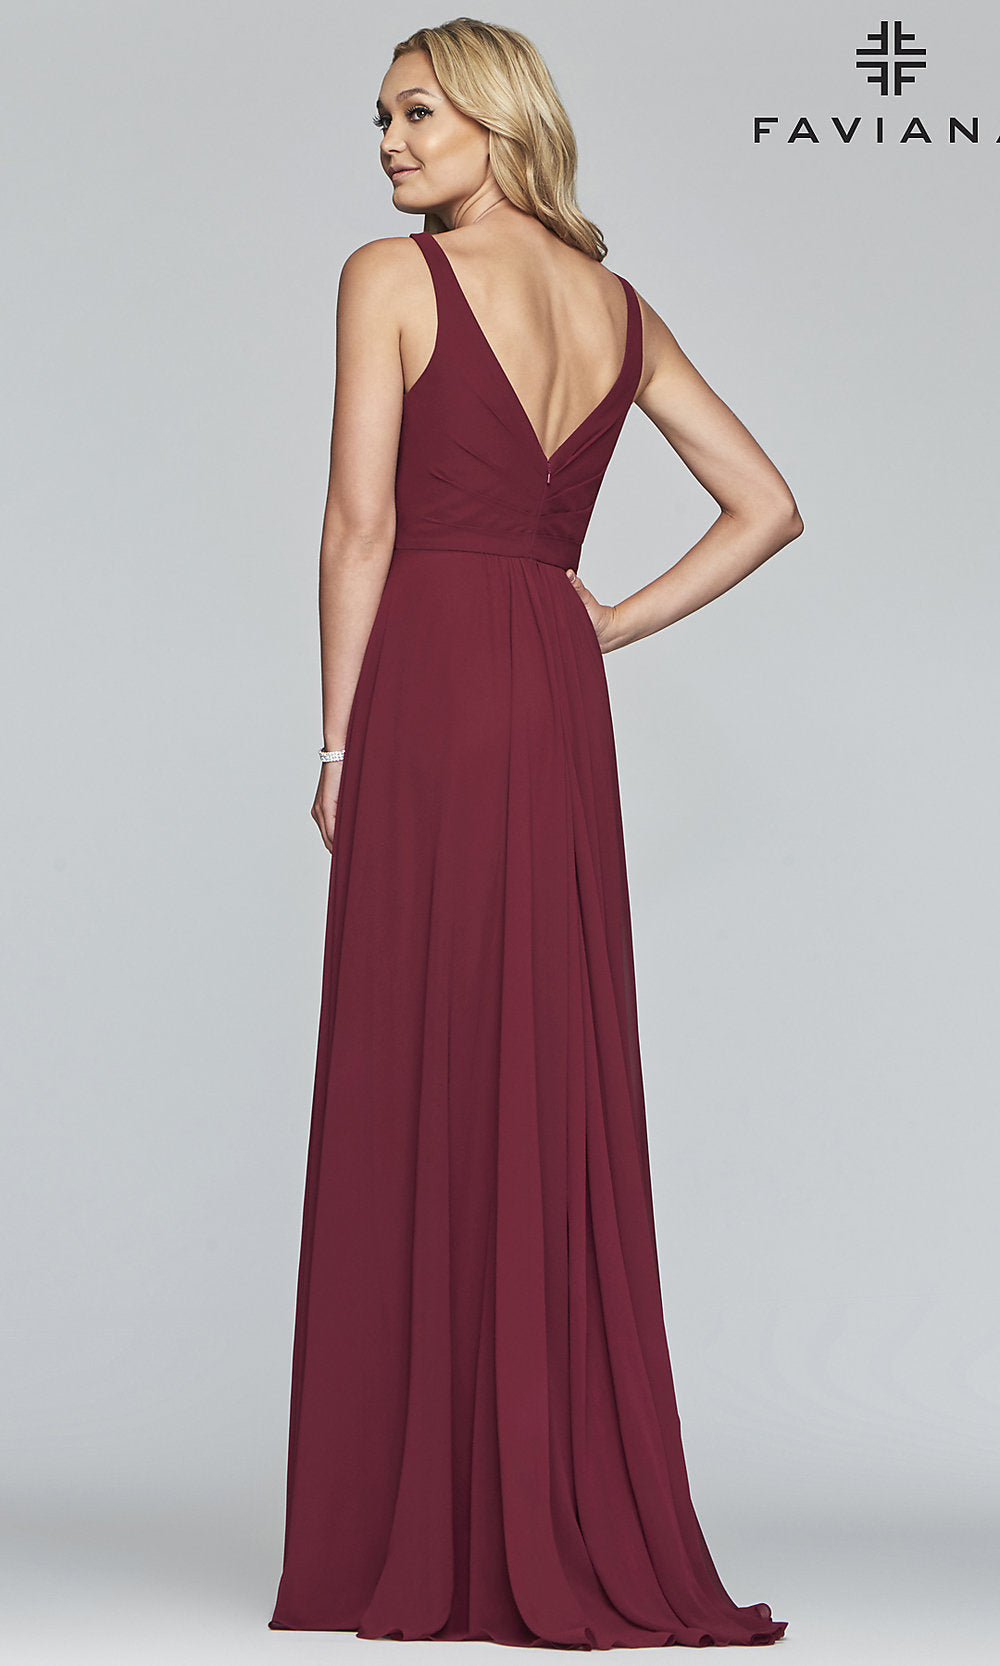  Long Faviana Classic V-Neck Formal Gown